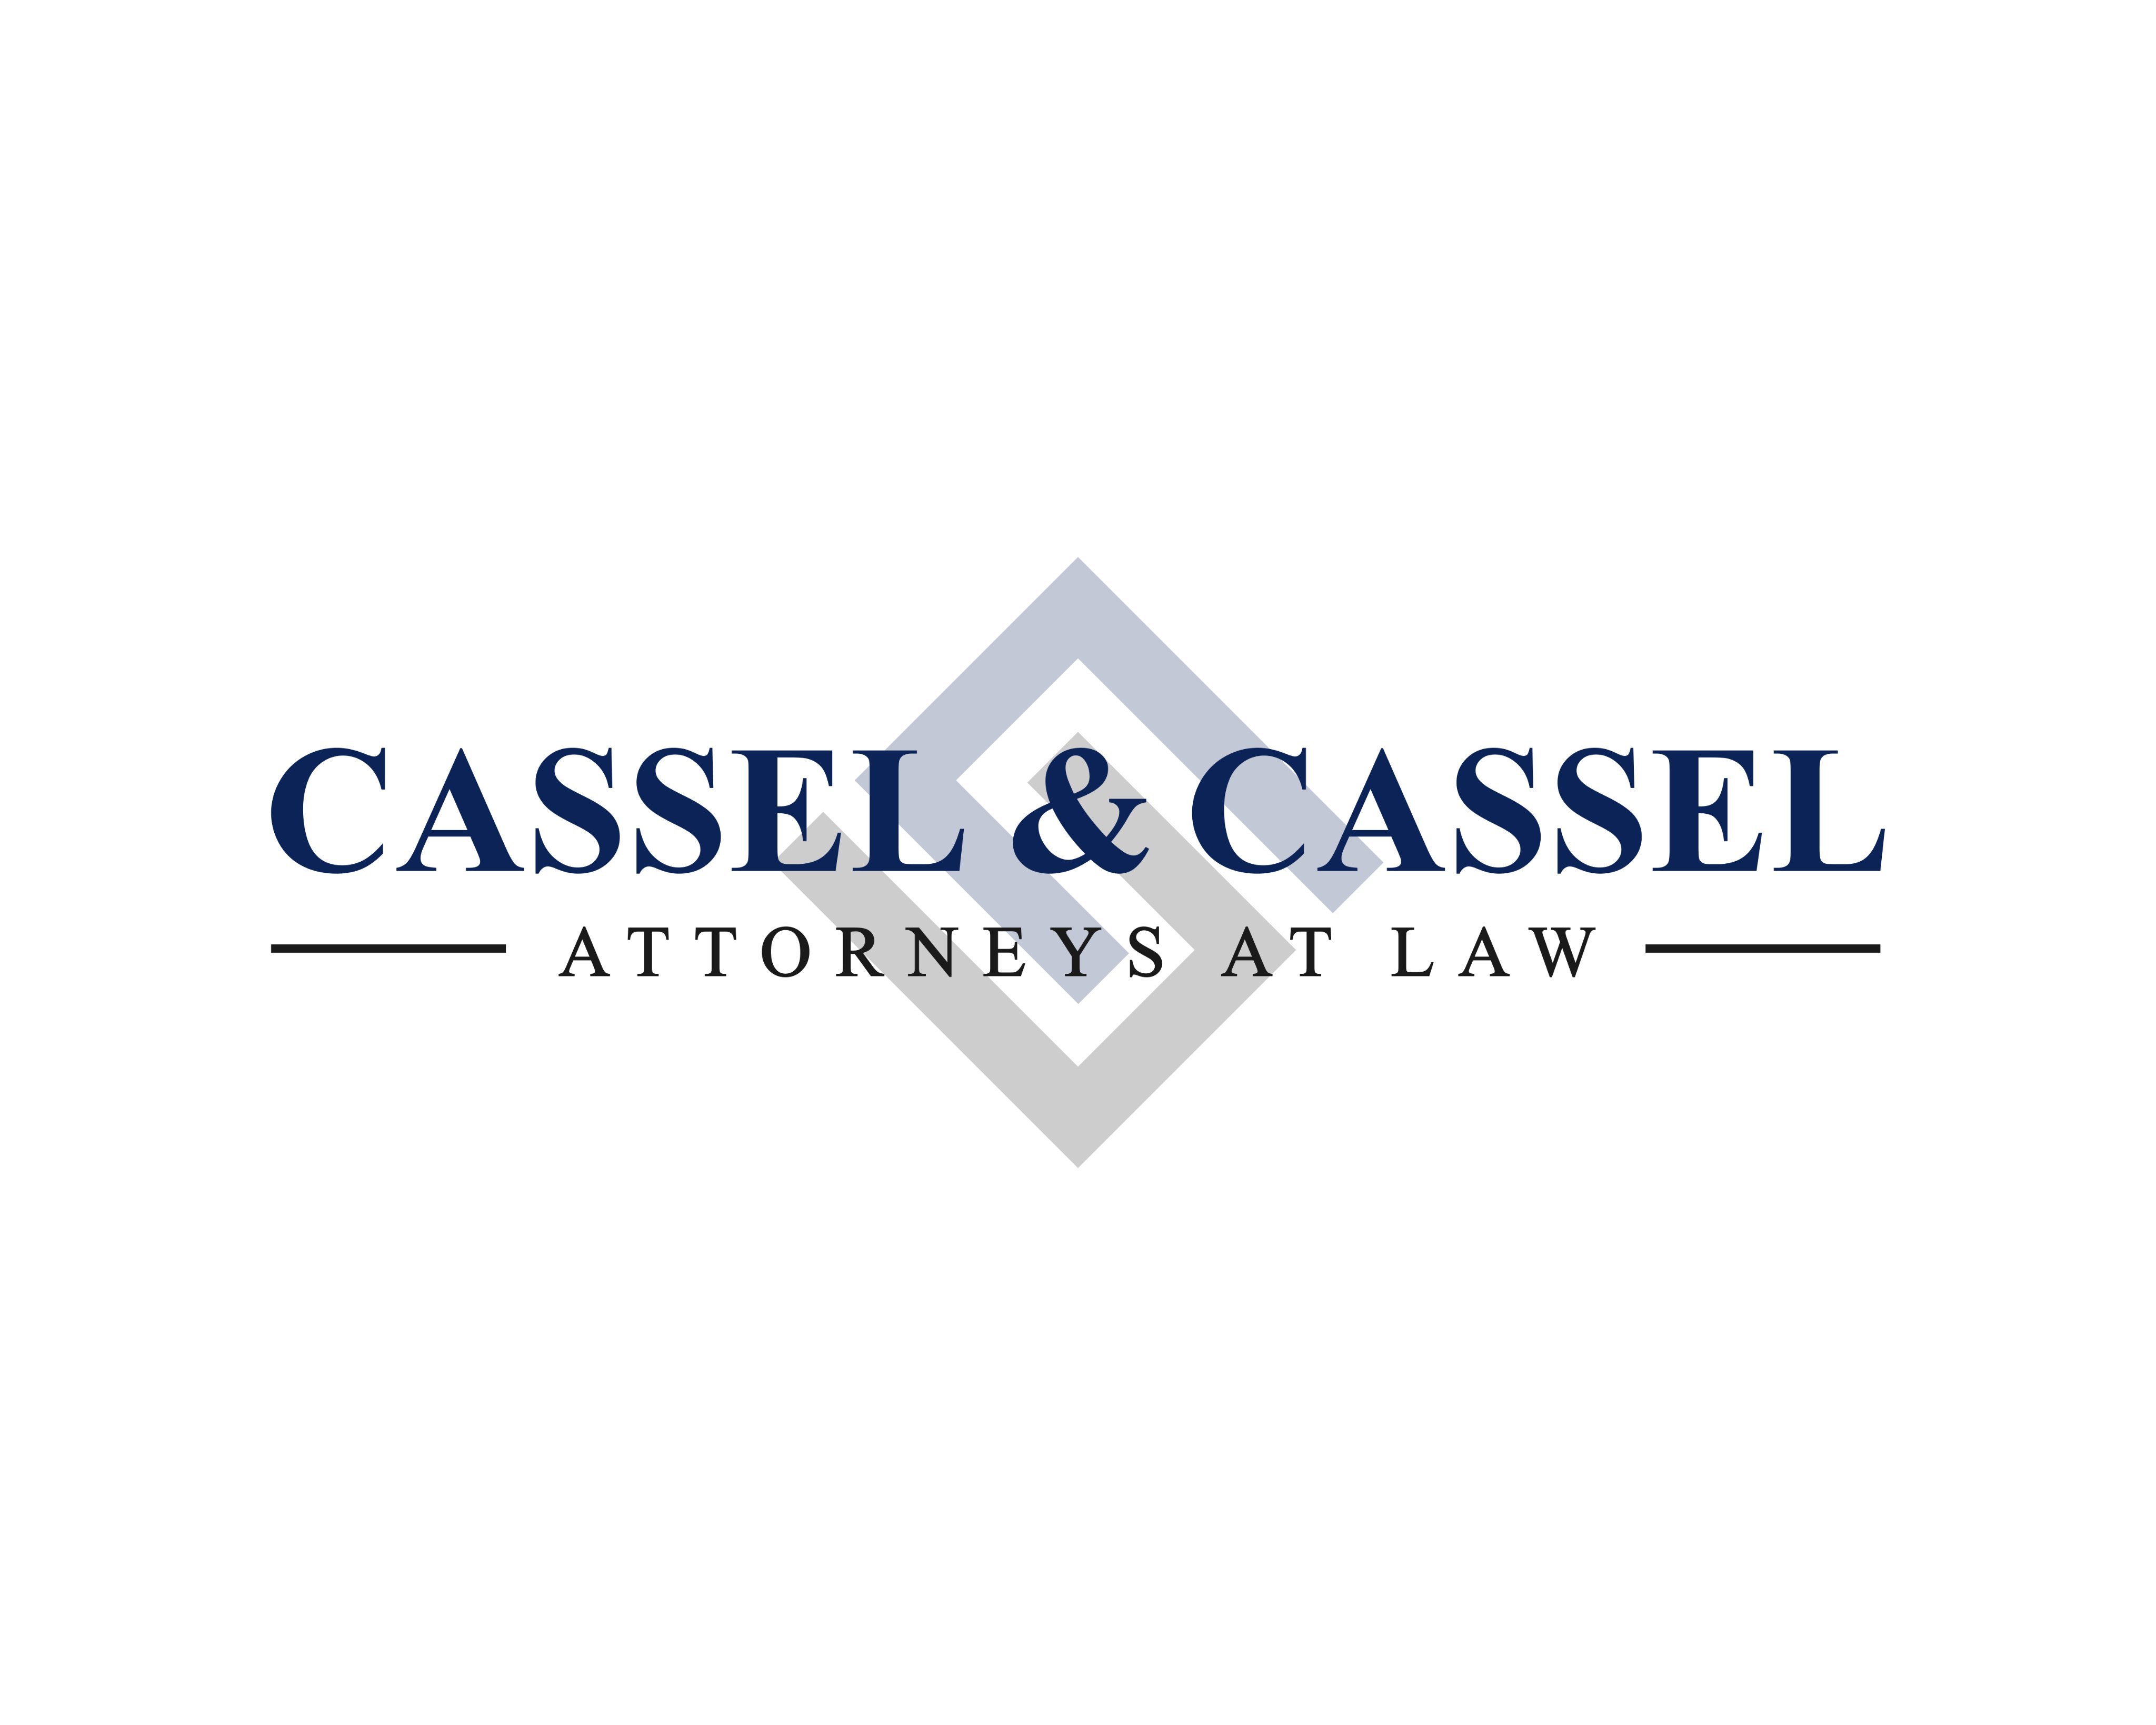 ​Cassel & Cassel, P.A., is dedicated solely to the representation of policyholders throughout Florida in property damage claims against their insurance carrier